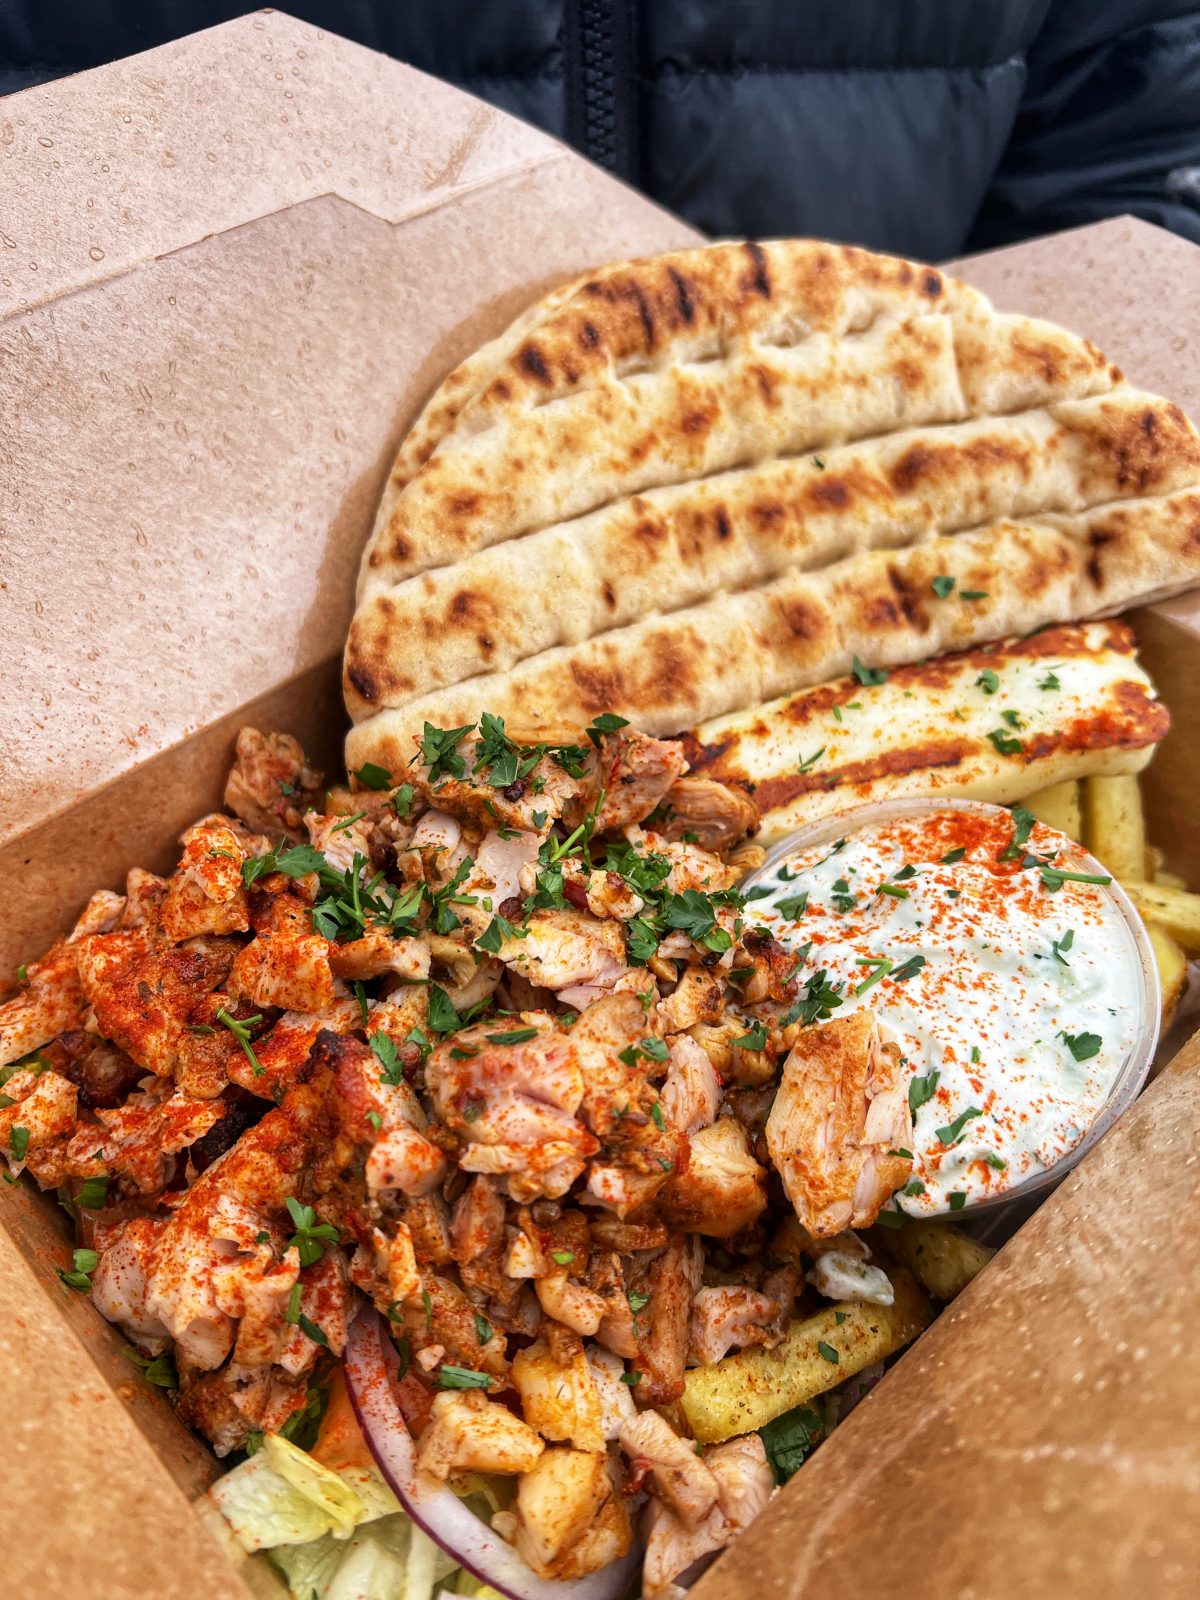 ThatZiki's famous gyros are also available as boxes. Credit: The Hoot Leeds